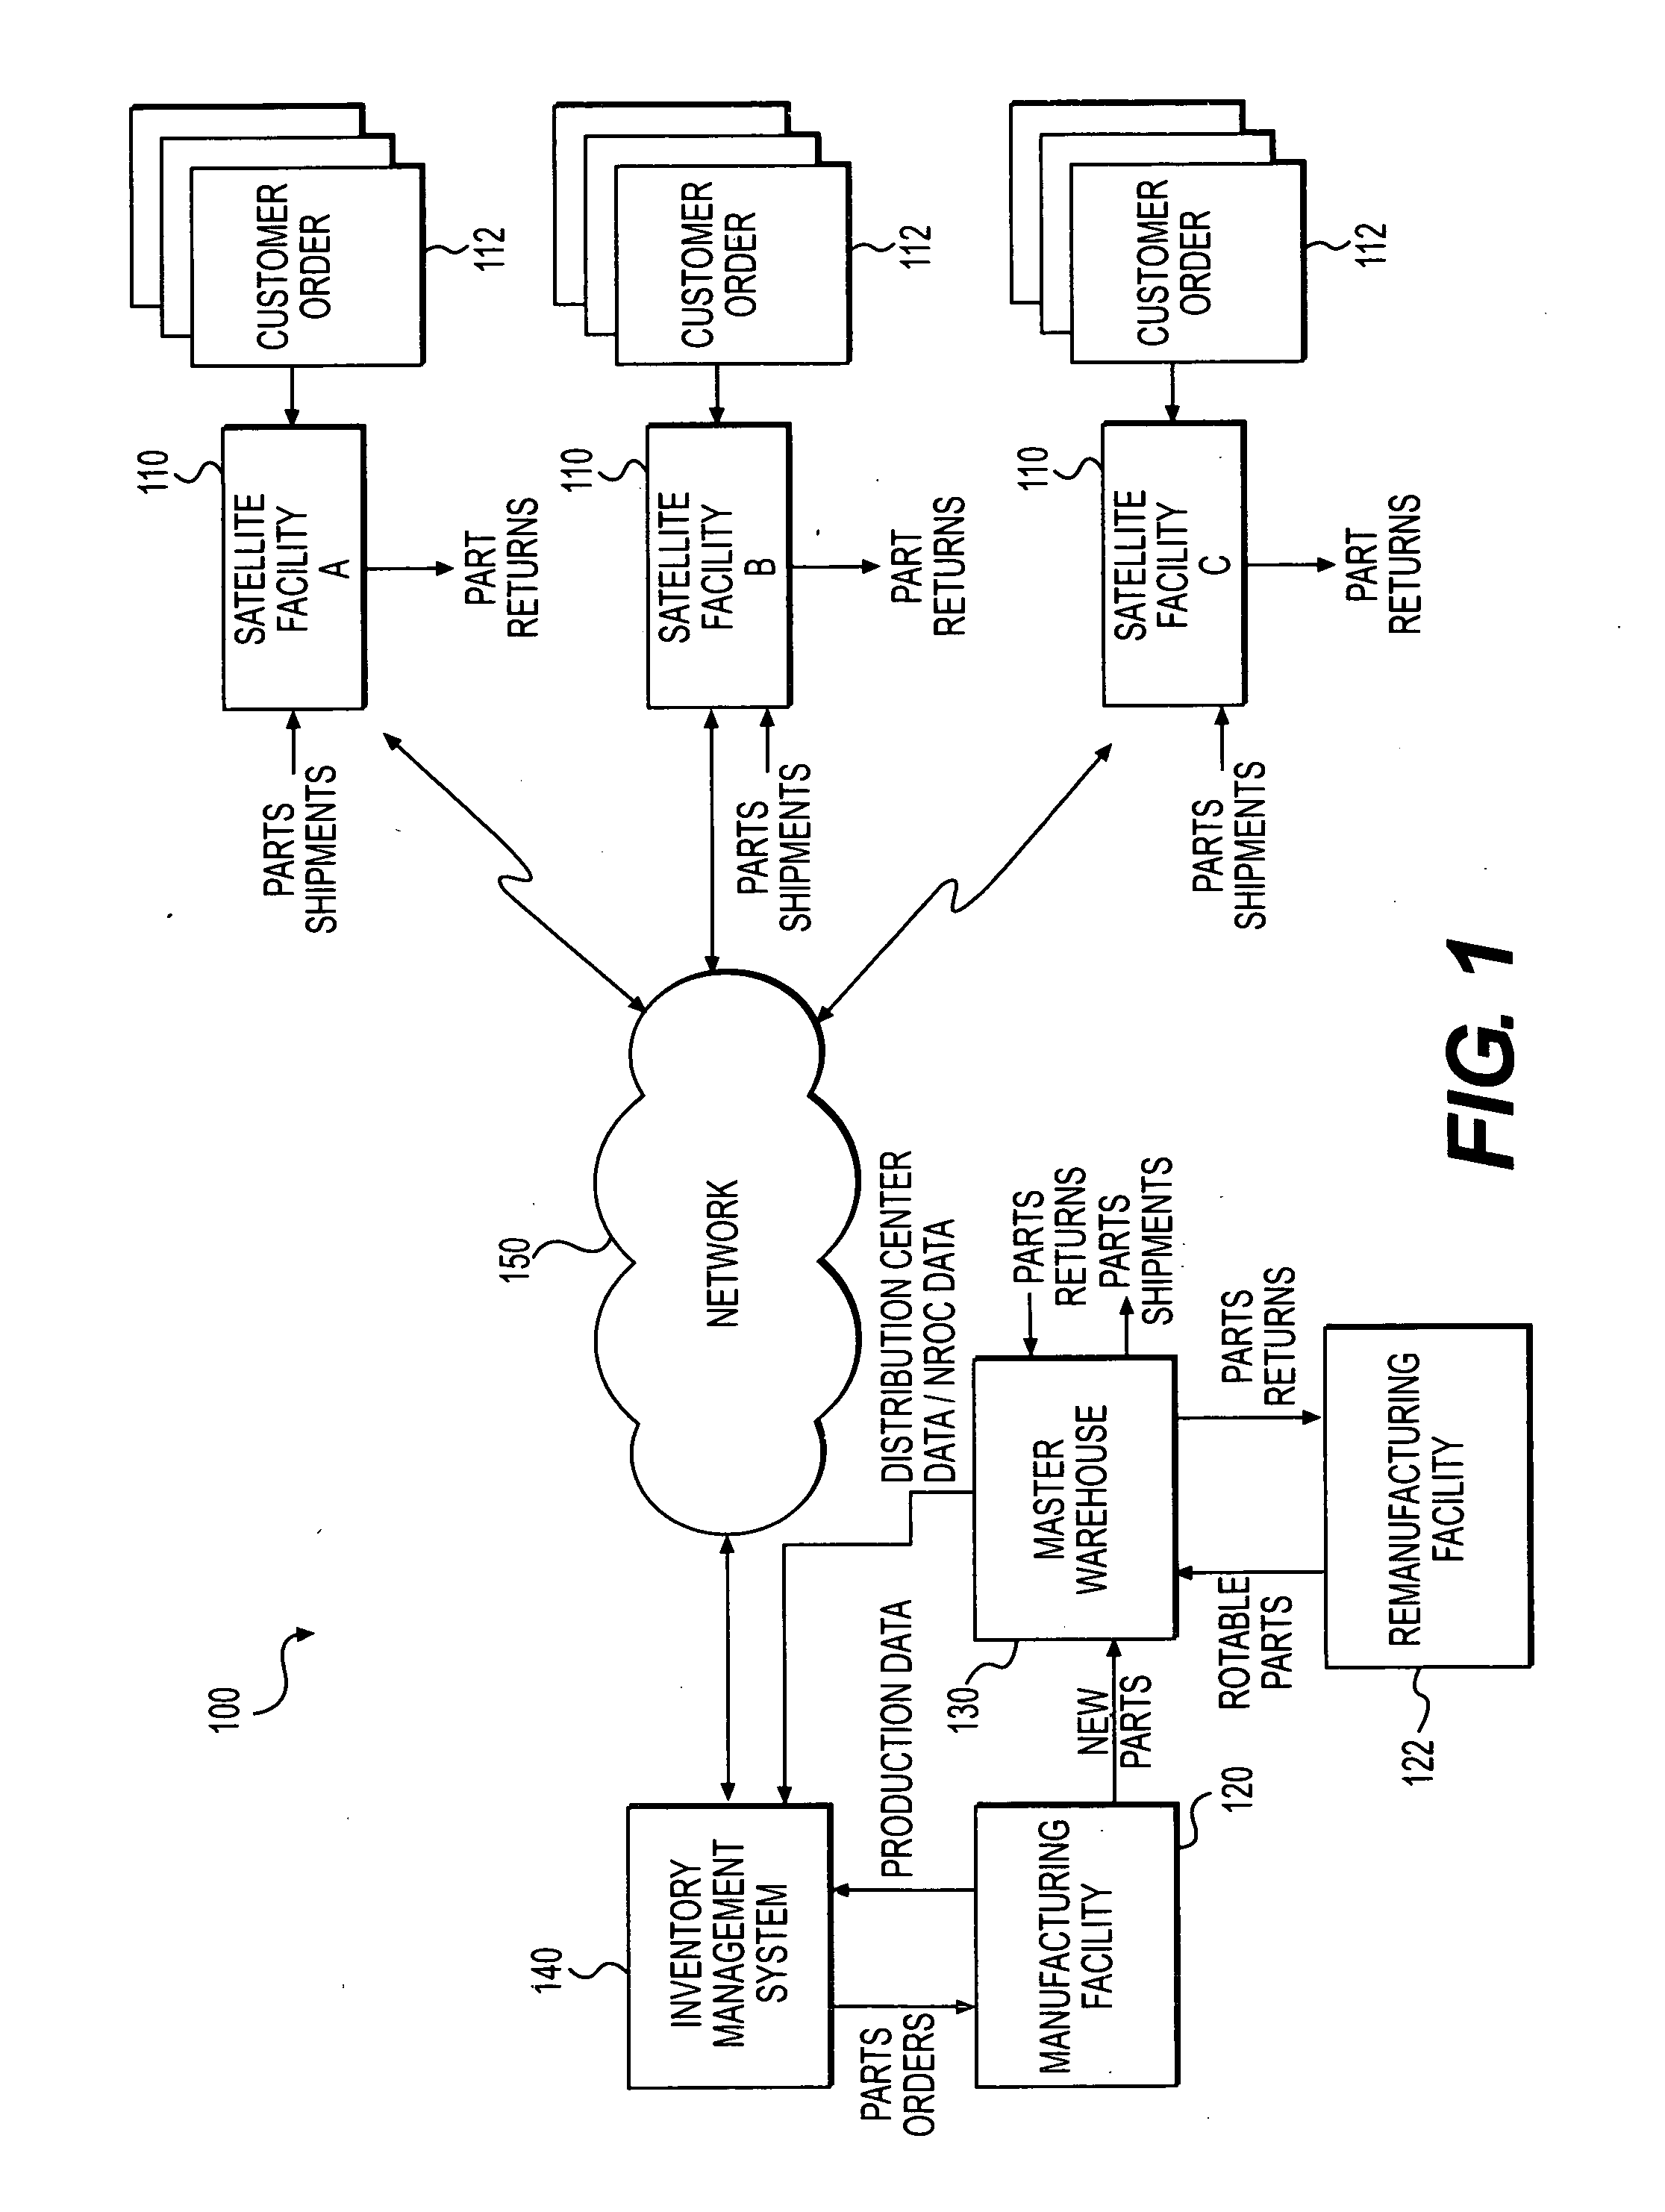 Method and system for forecasting demand of rotable parts